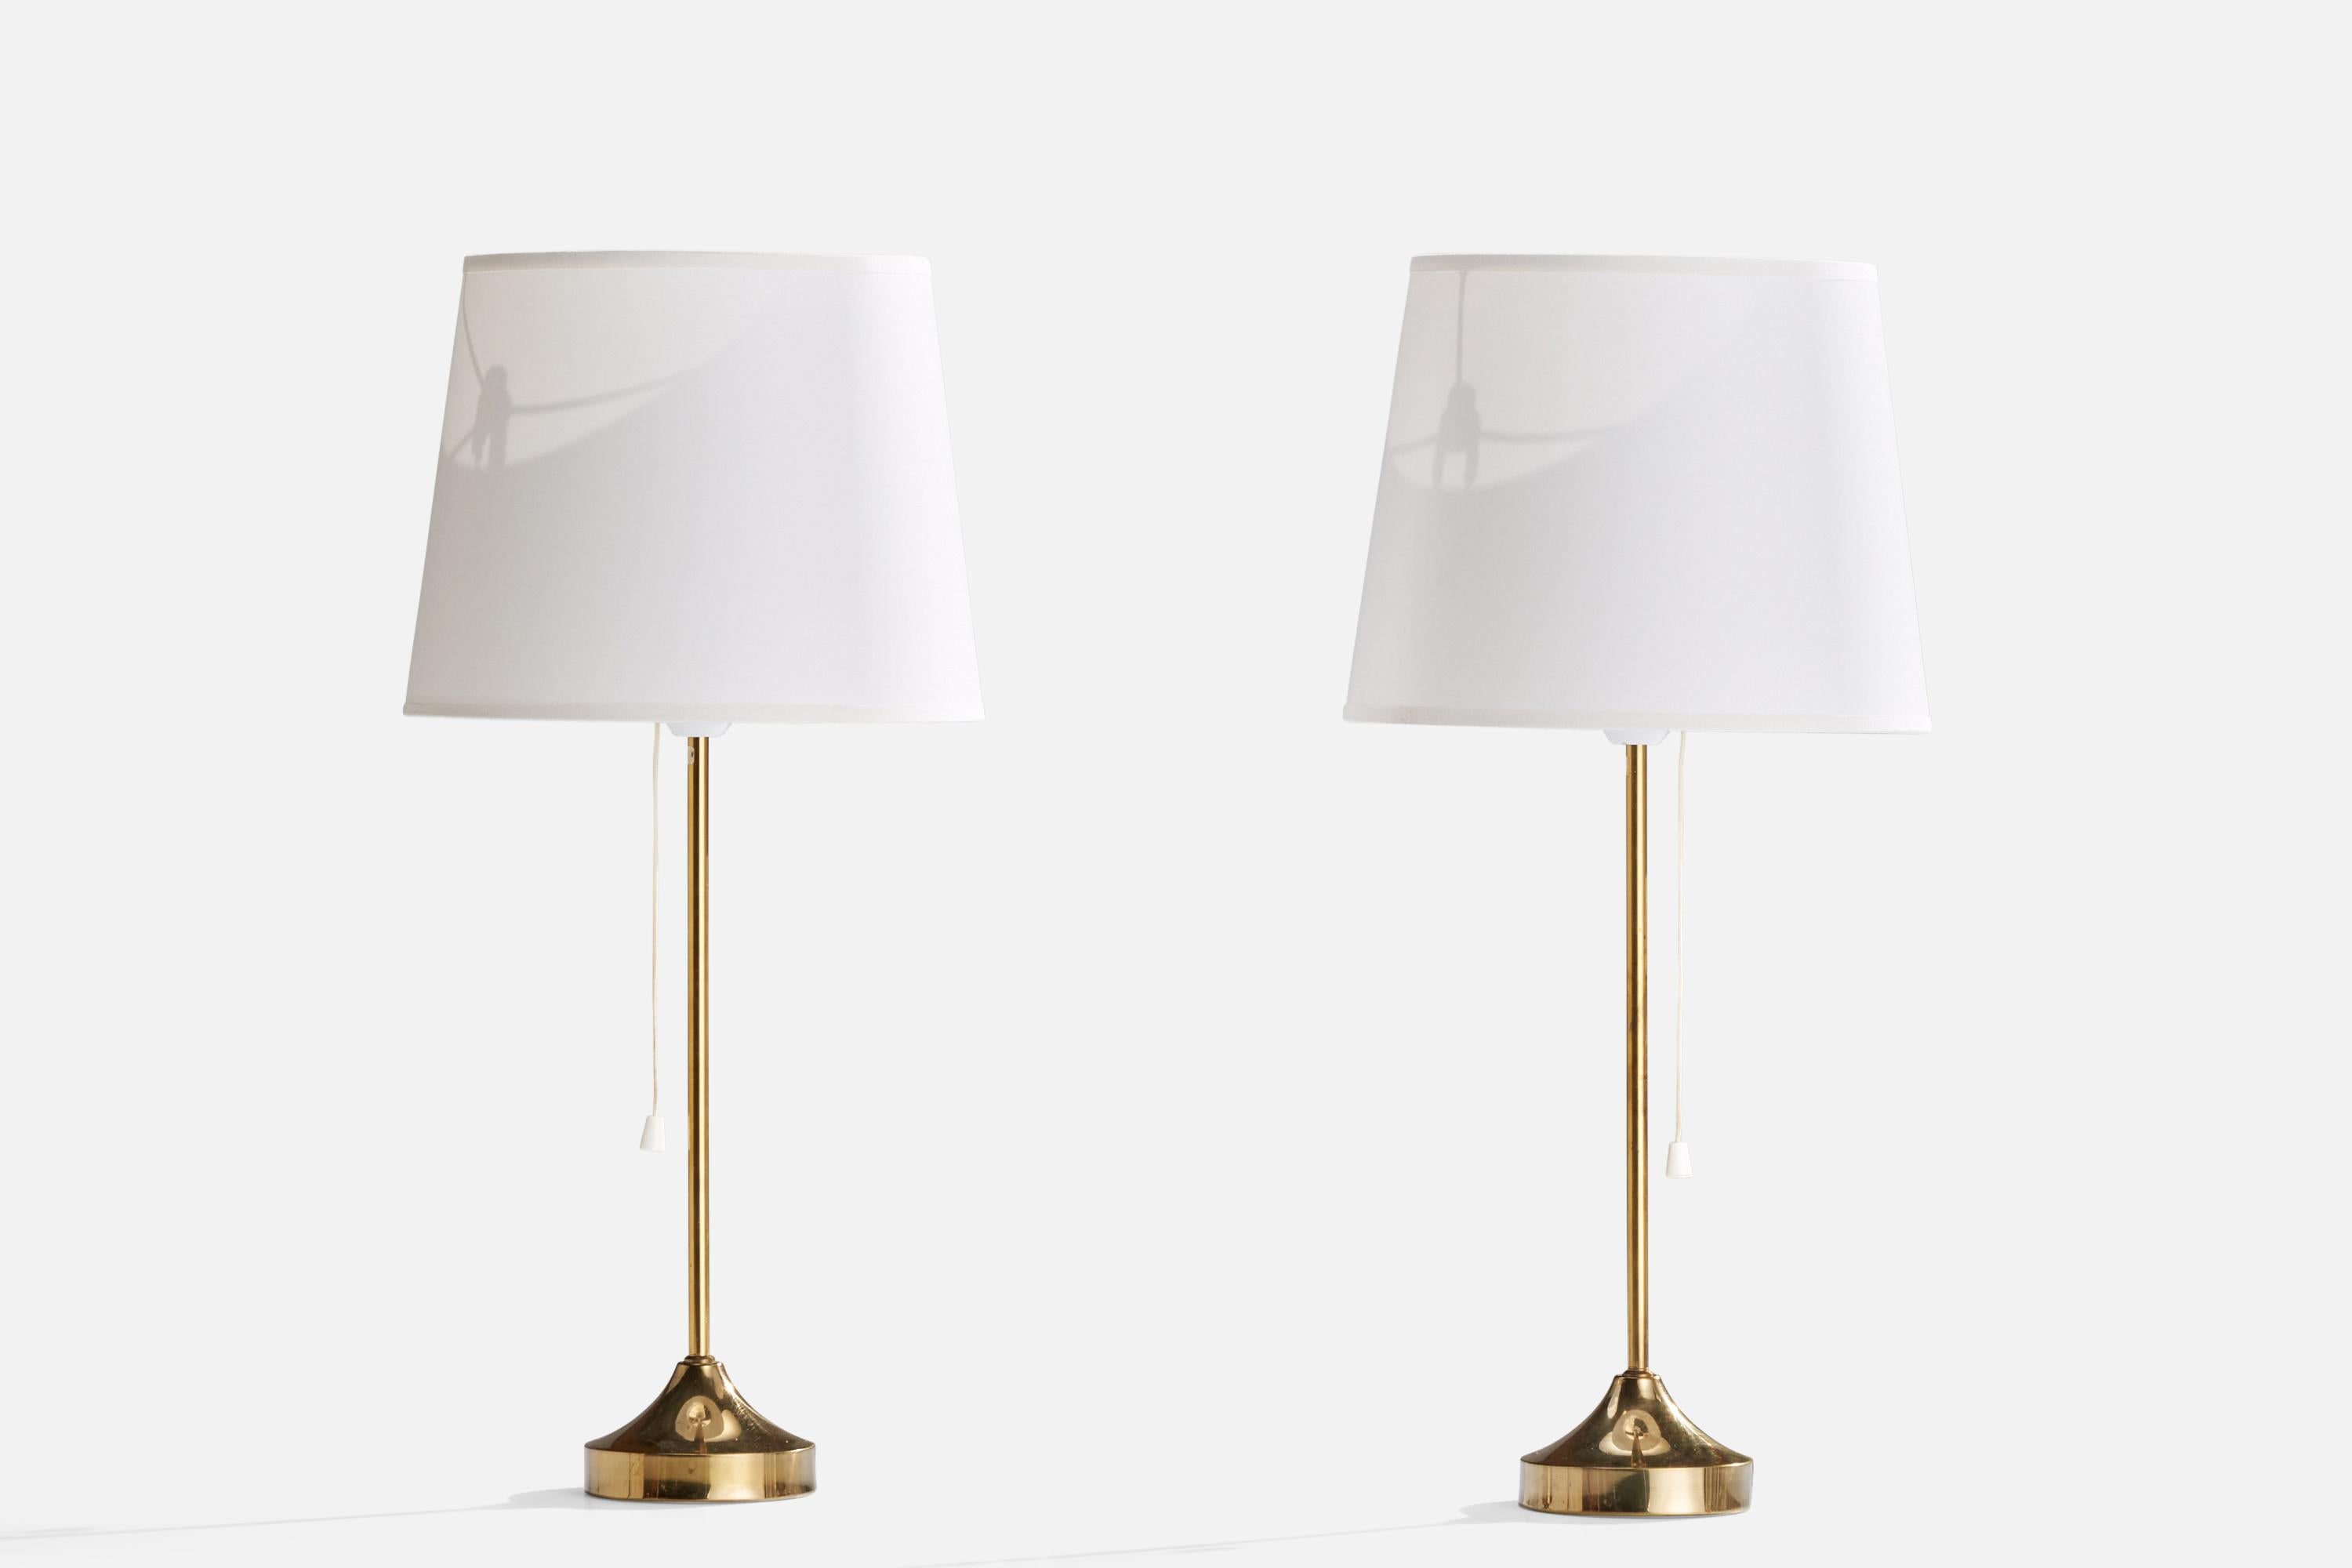 A pair of brass and white fabric table lamps designed and produced by NAFA, Sweden, 1950s.

Dimensions of Lamp (inches): 15.75” H x 4” Diameter
Dimensions of Shade (inches): 8”  Top Diameter x 10”  Bottom Diameter x 8” H
Dimensions of Lamp with